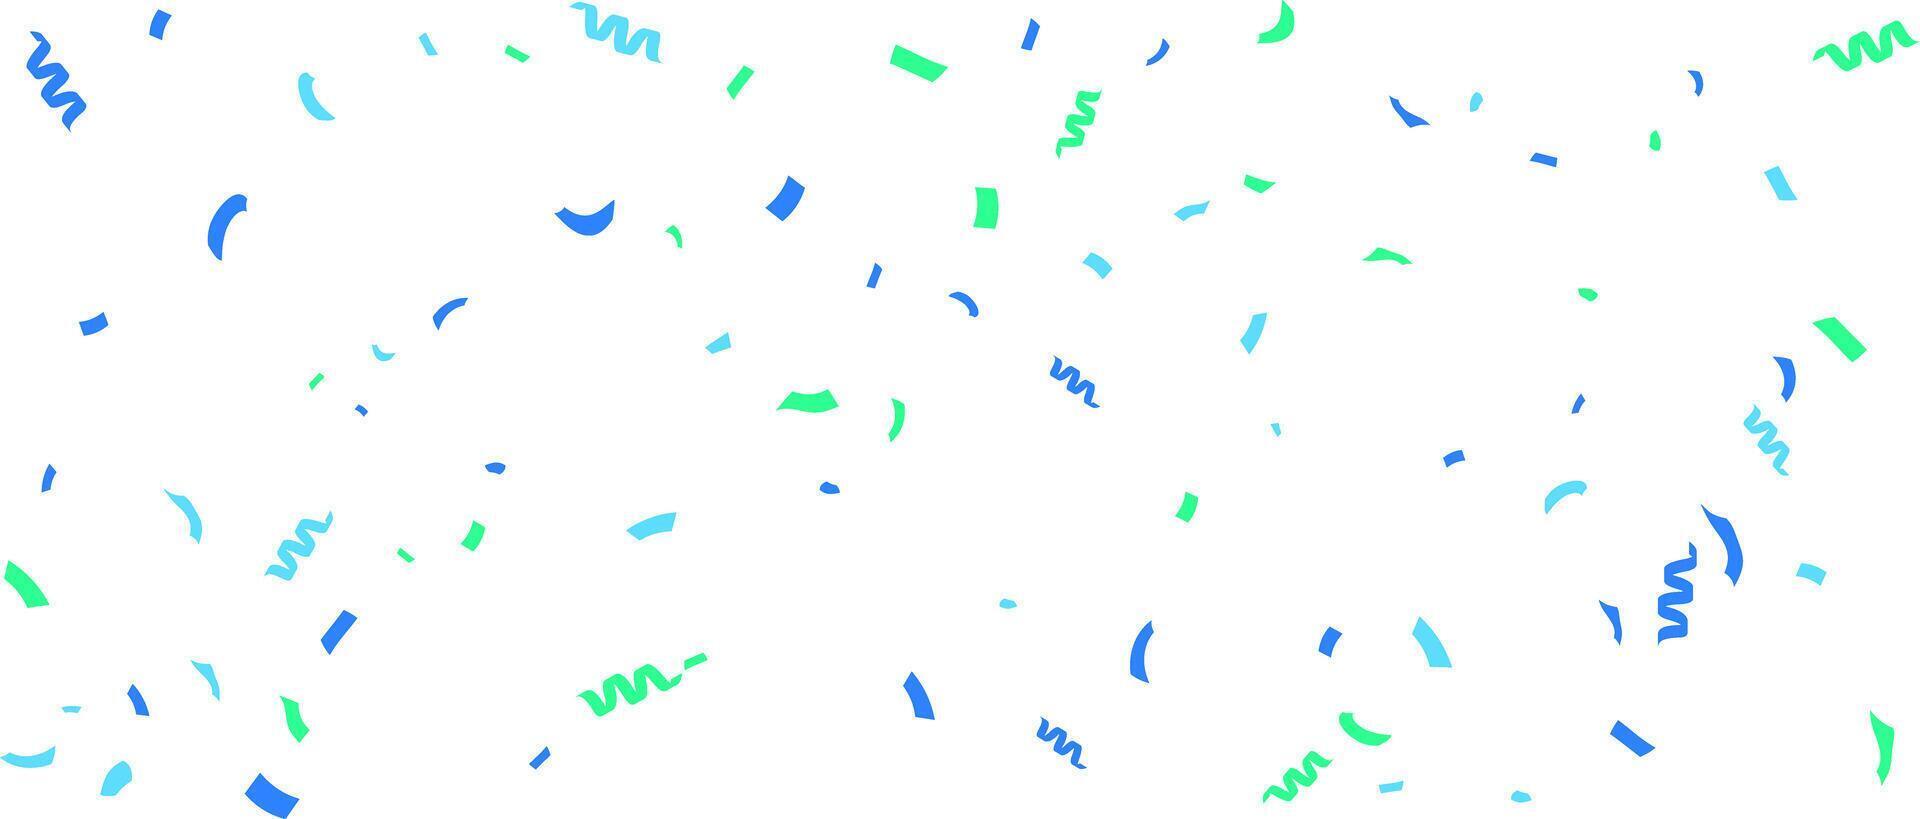 Colorful confetti and zigzag ribbon falling from above Streamers, tinsel vector